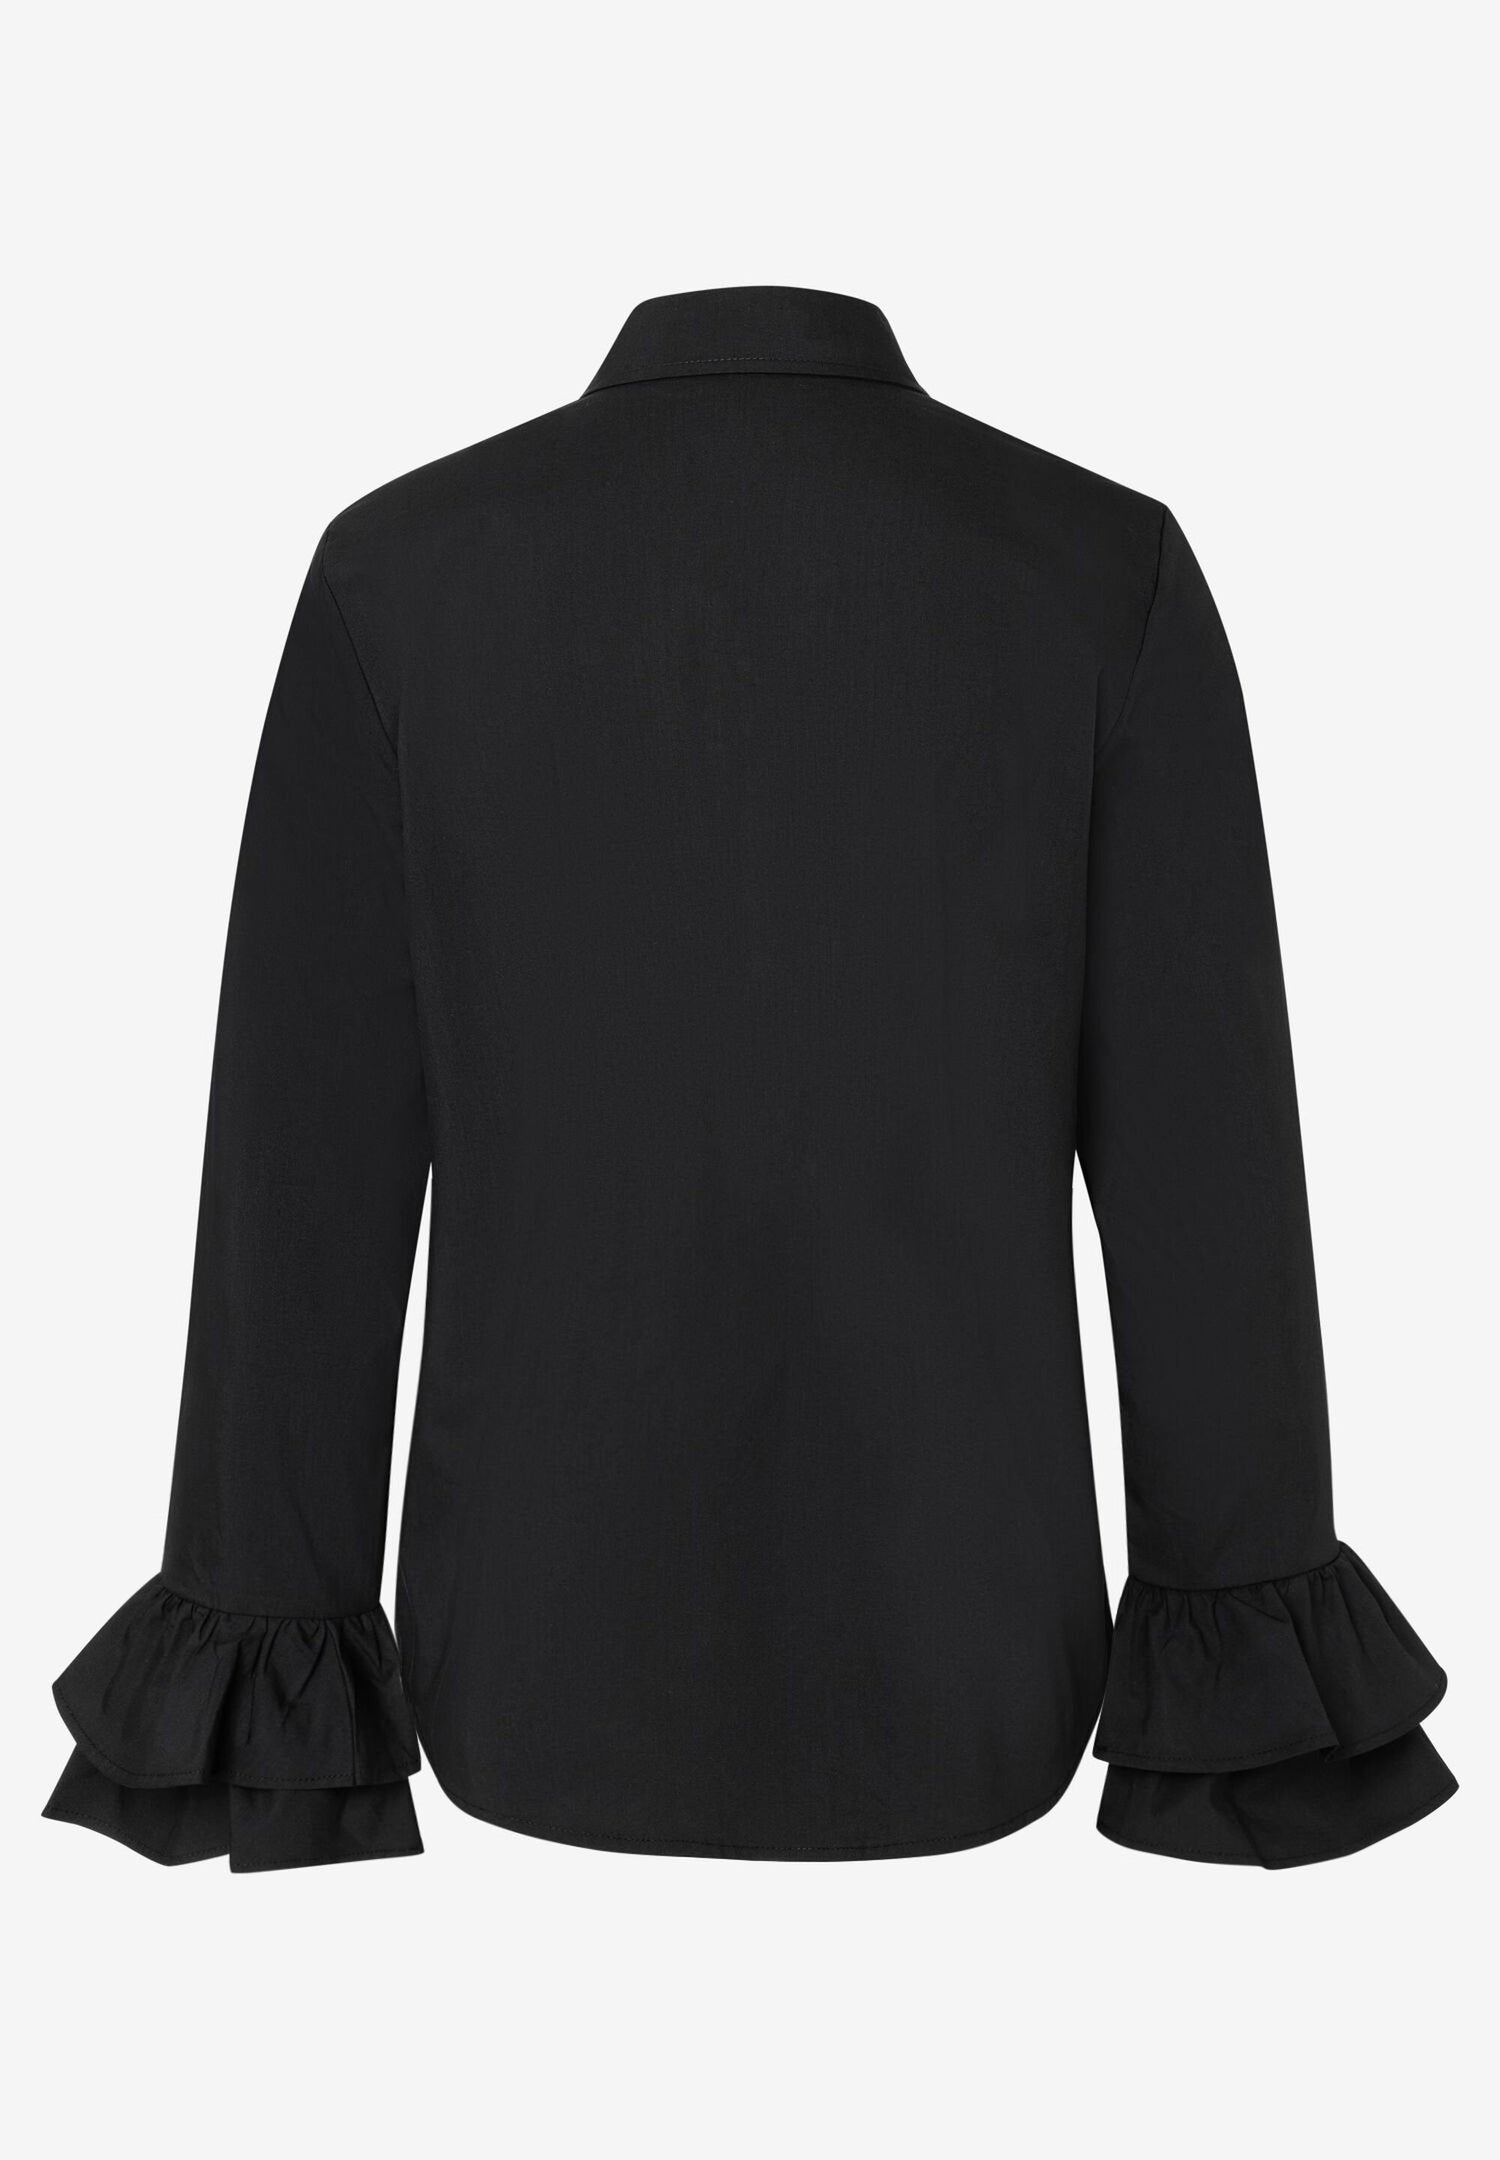 Black Blouse With Statement Sleeves_41012005_0790_04